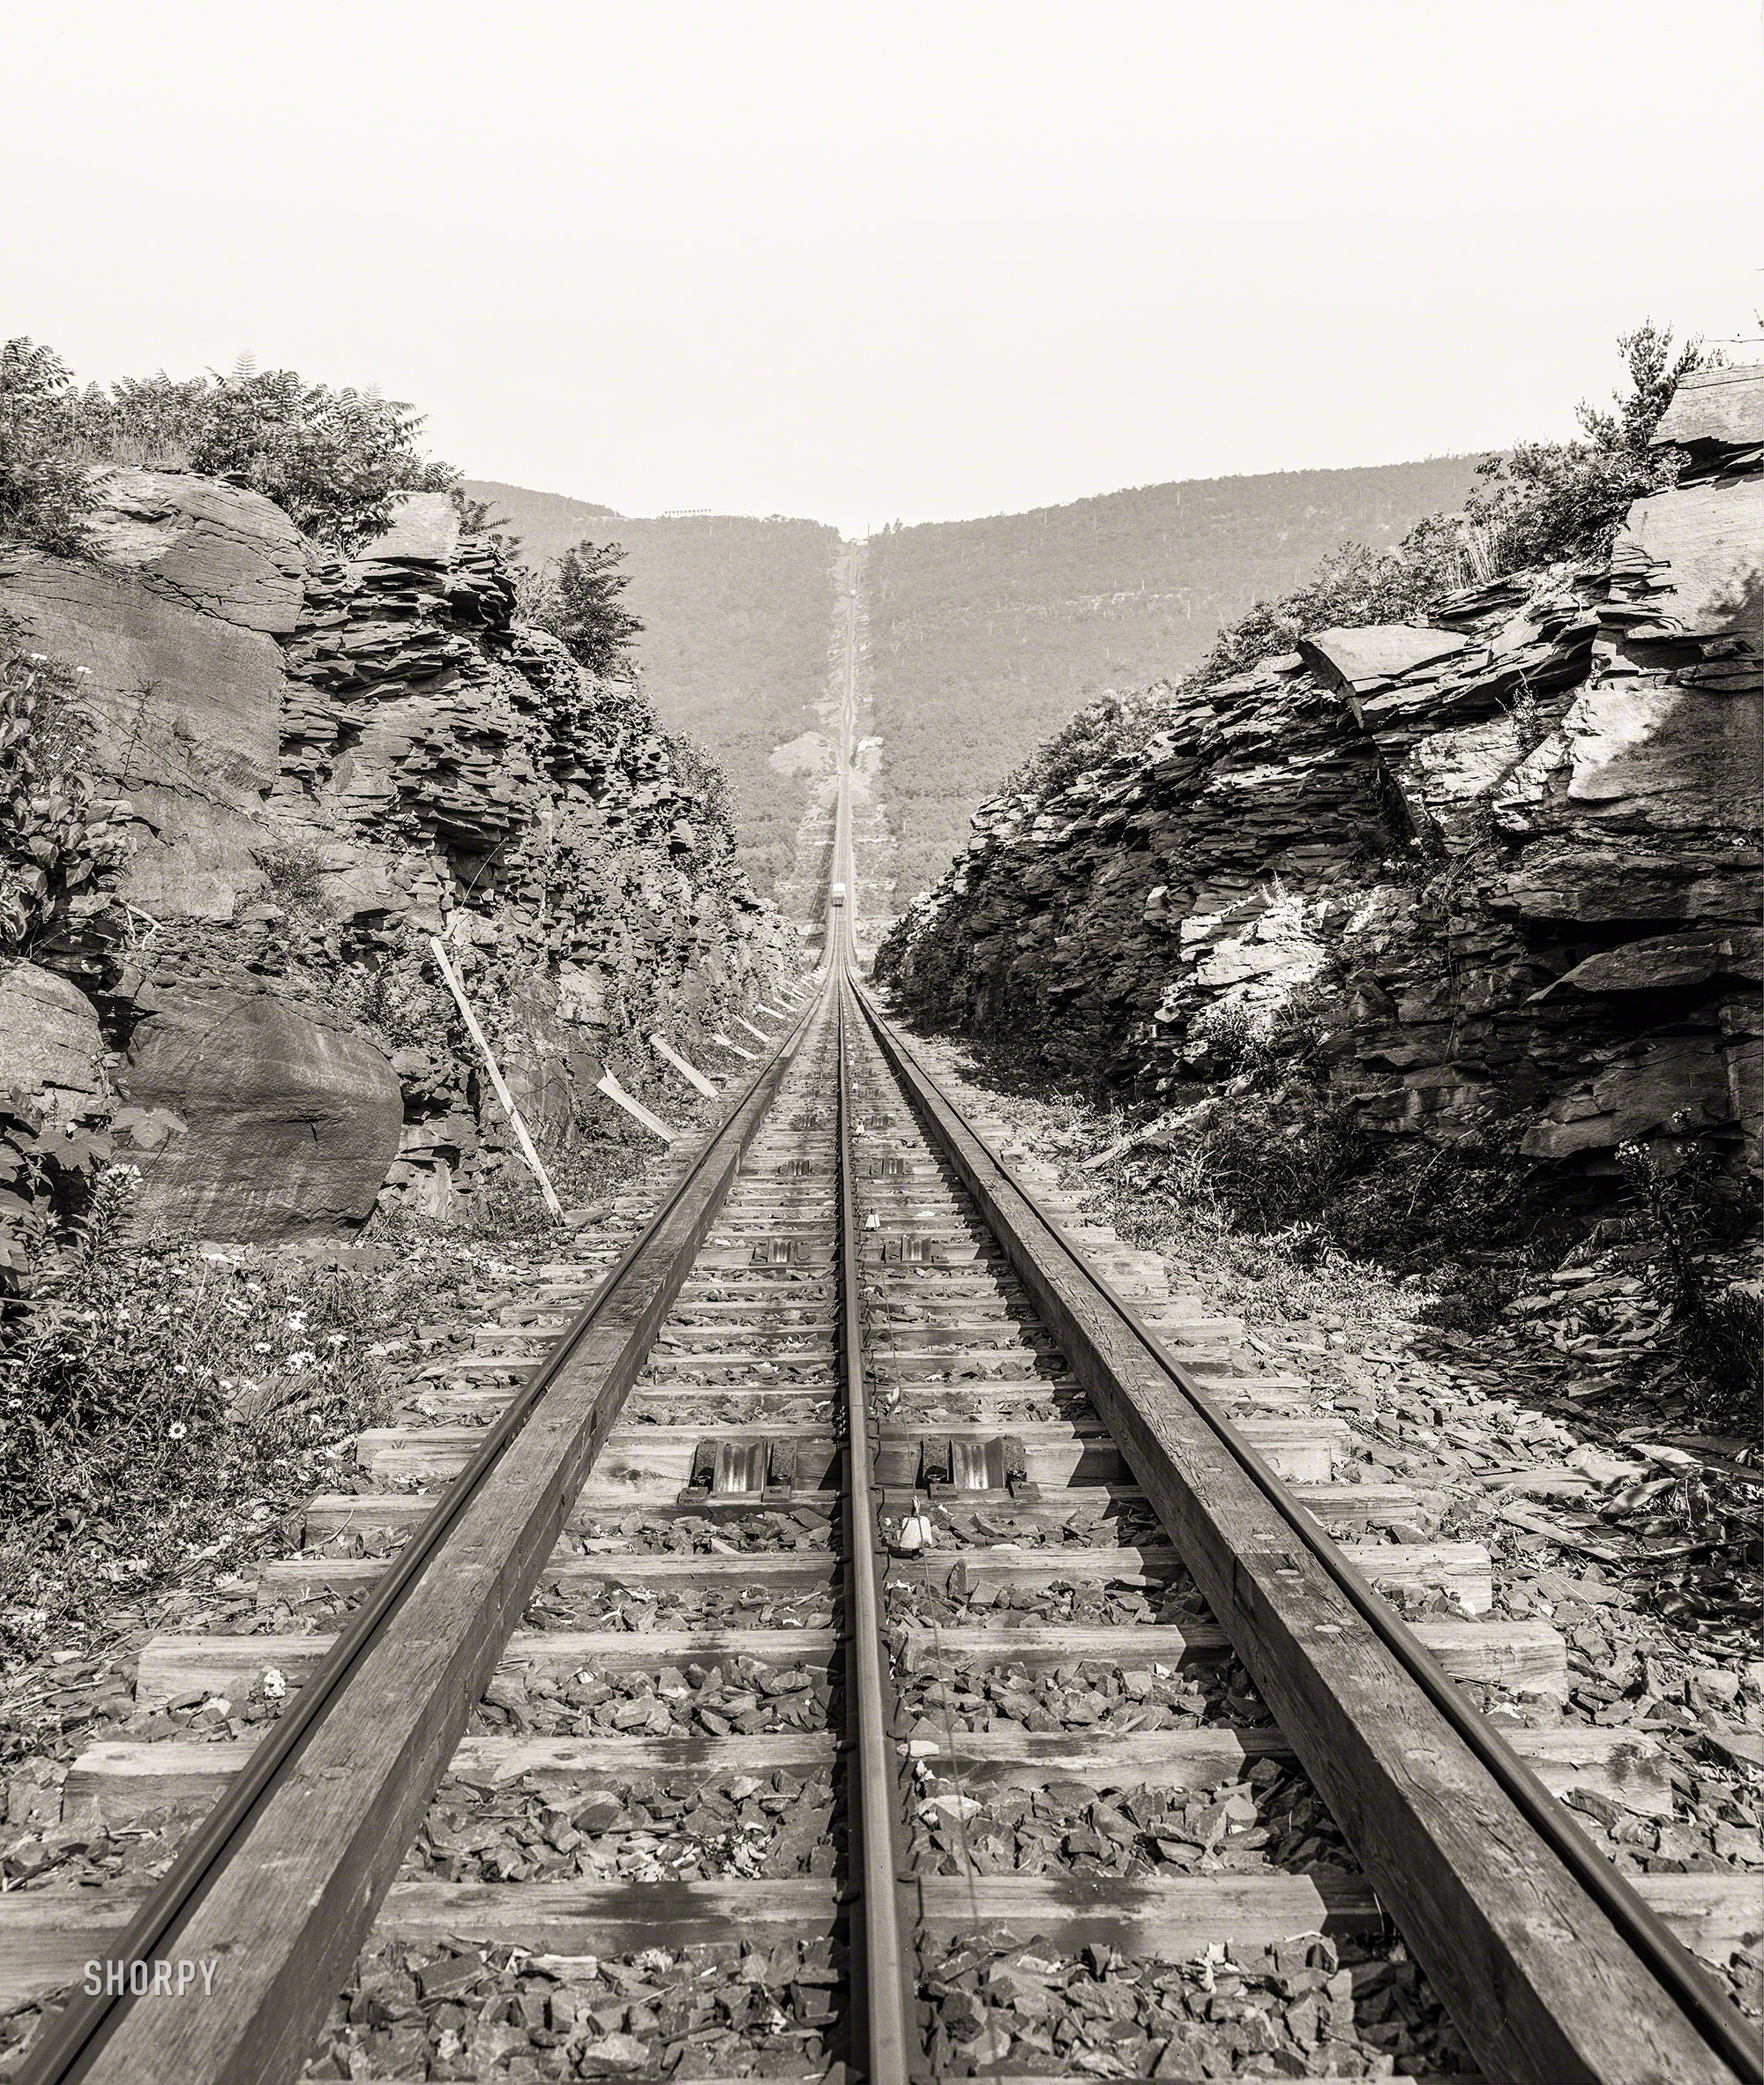 Circa 1900. "Otis Elevating Railway, looking up toward Mountain House Hotel, Catskill Mountains, New York." 8x10 inch dry plate glass negative. View full size.